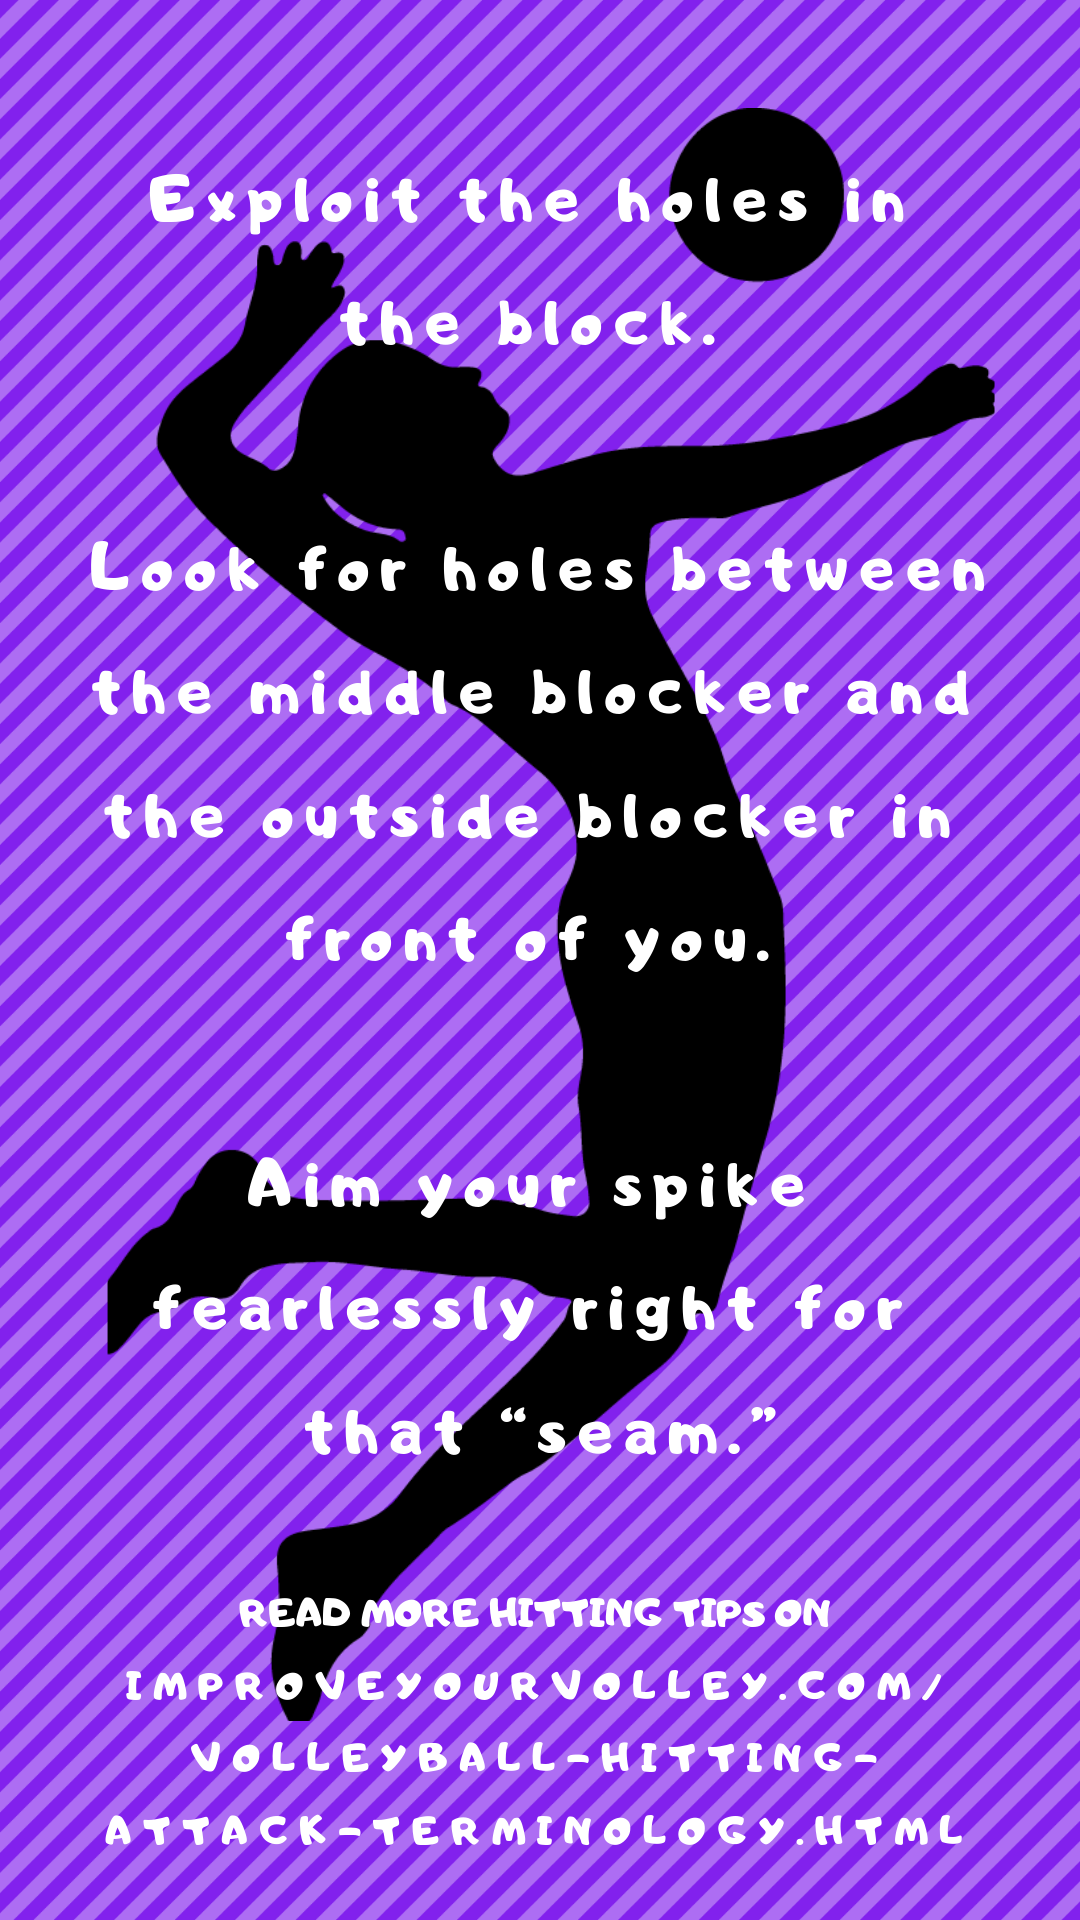 Exploit the holes in the block. Look for holes between the middle blocker and the outside blocker in front of you. Aim your spike fearlessly right for that “seam.”